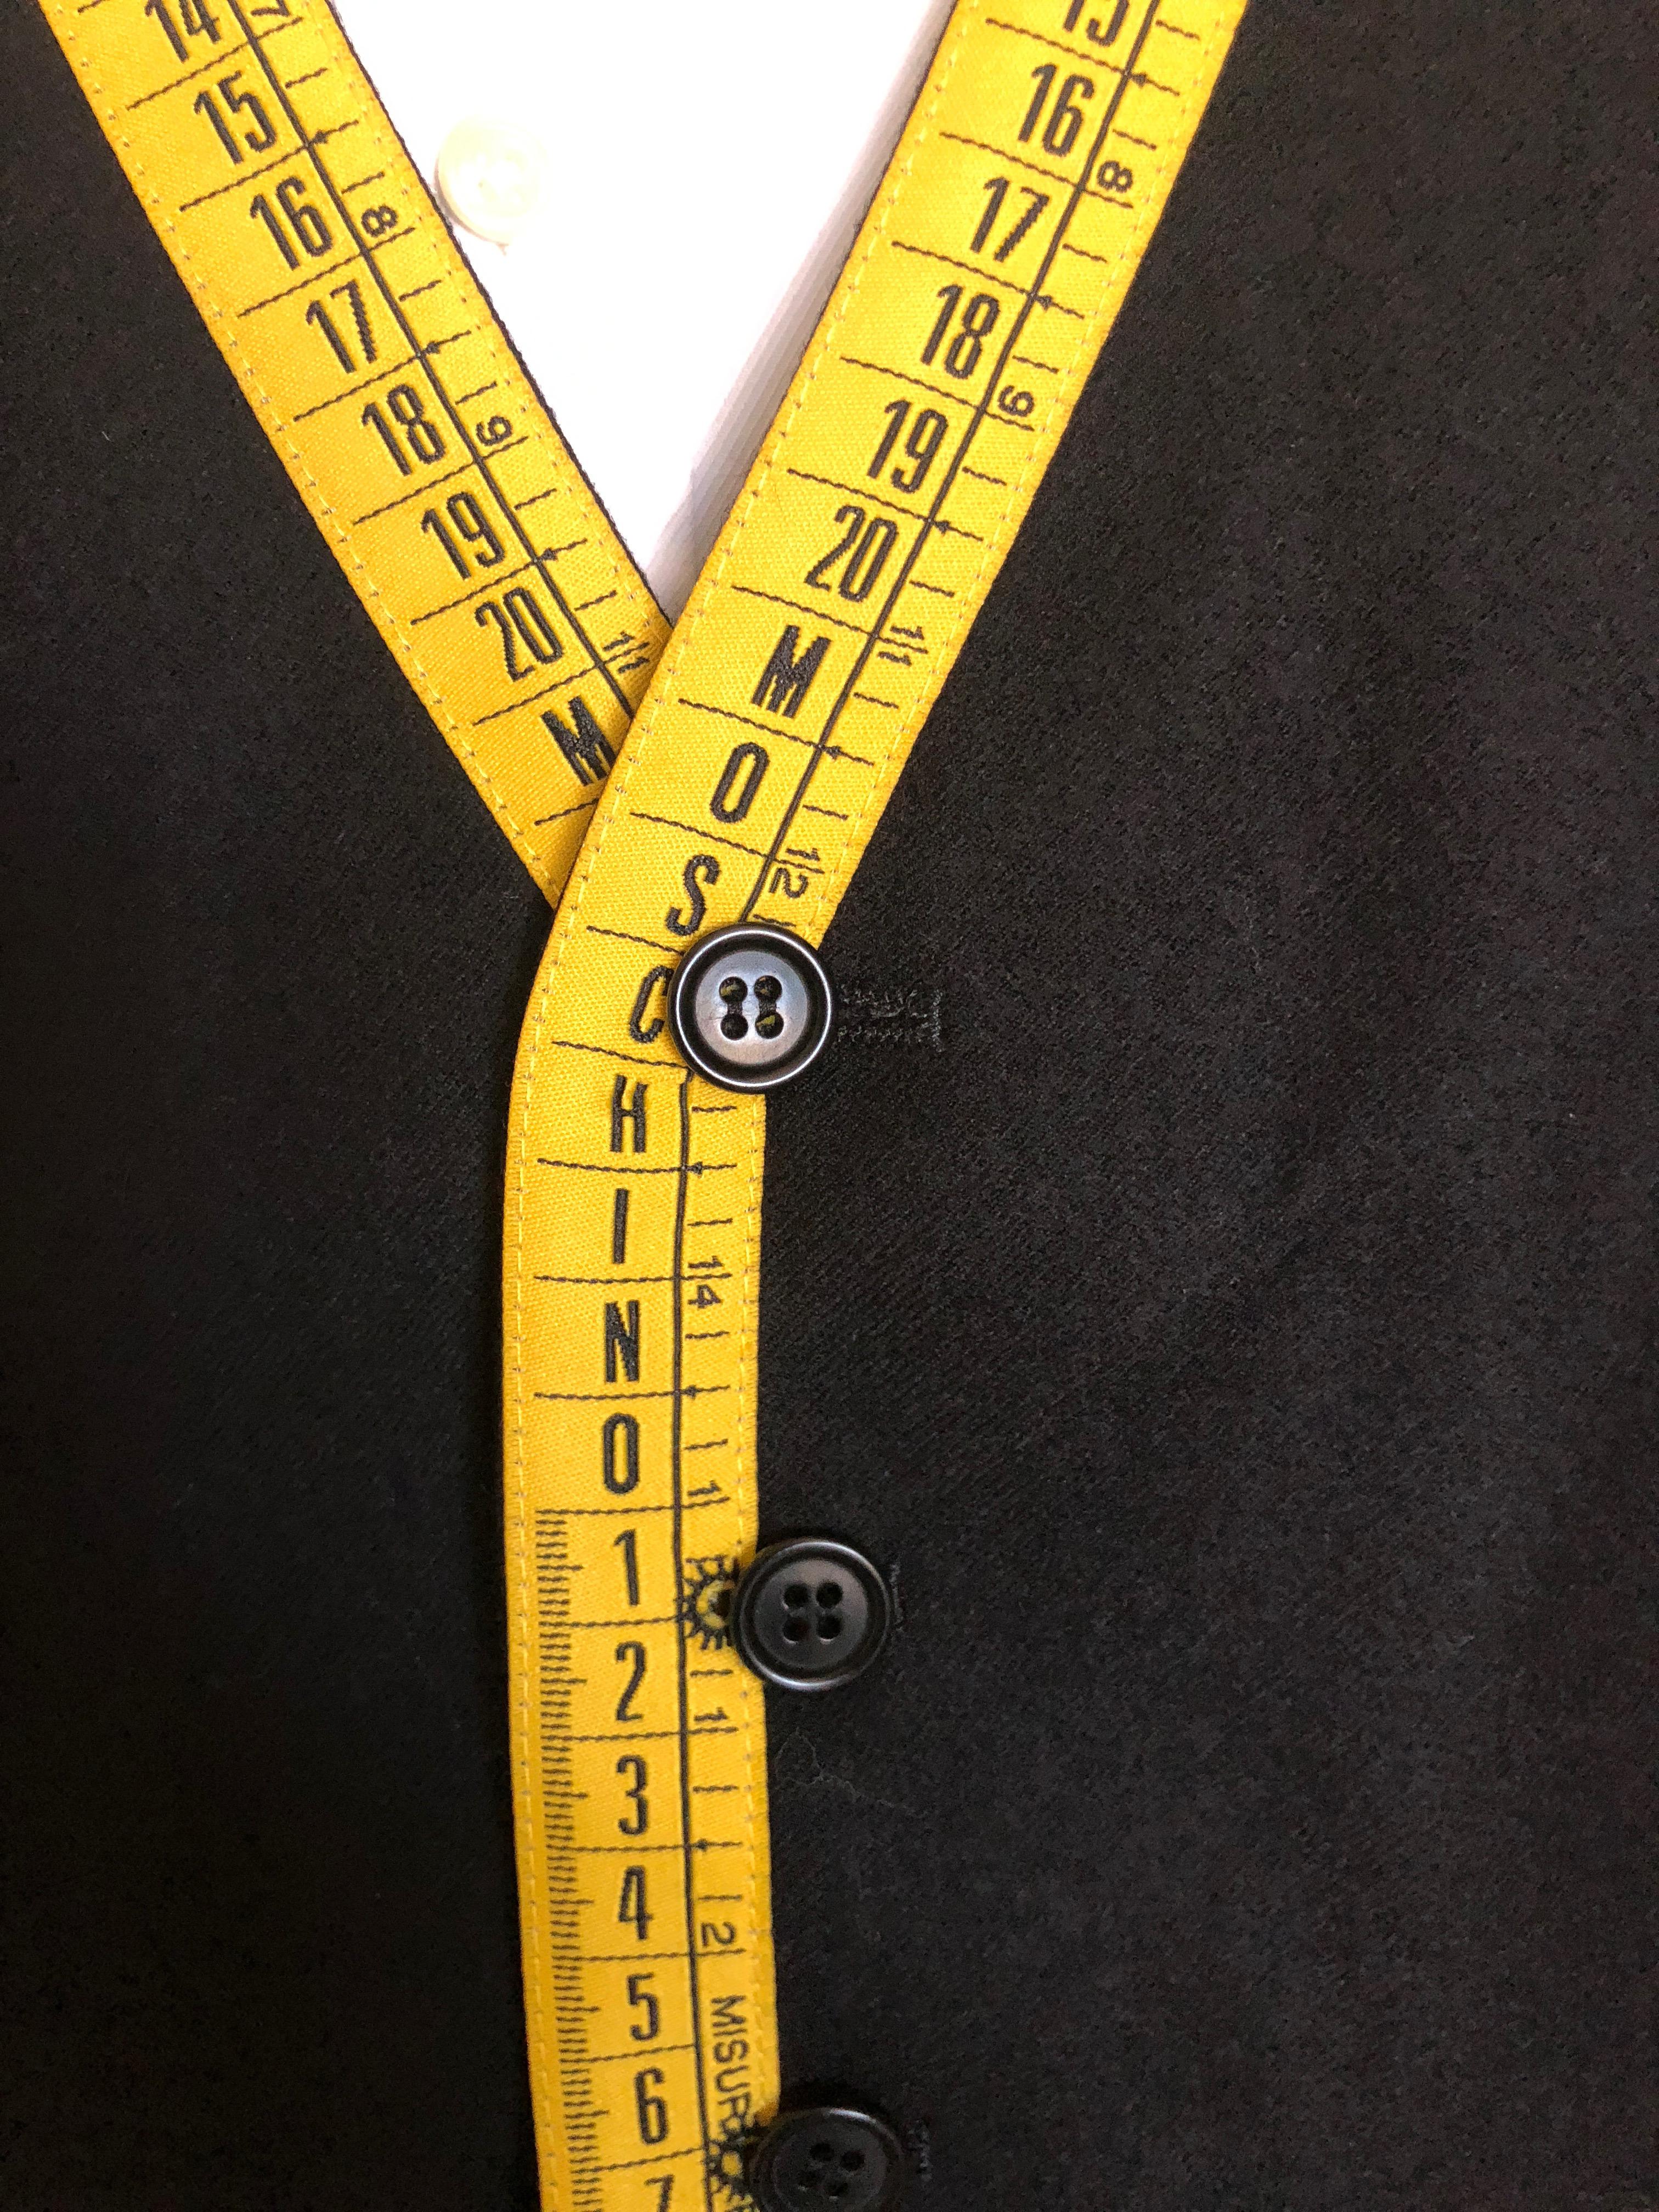 Moschino 1989 Cheap & Chic Iconic Vintage Mens Tape Measure Jacket and Vest In Excellent Condition For Sale In Cloverdale, CA